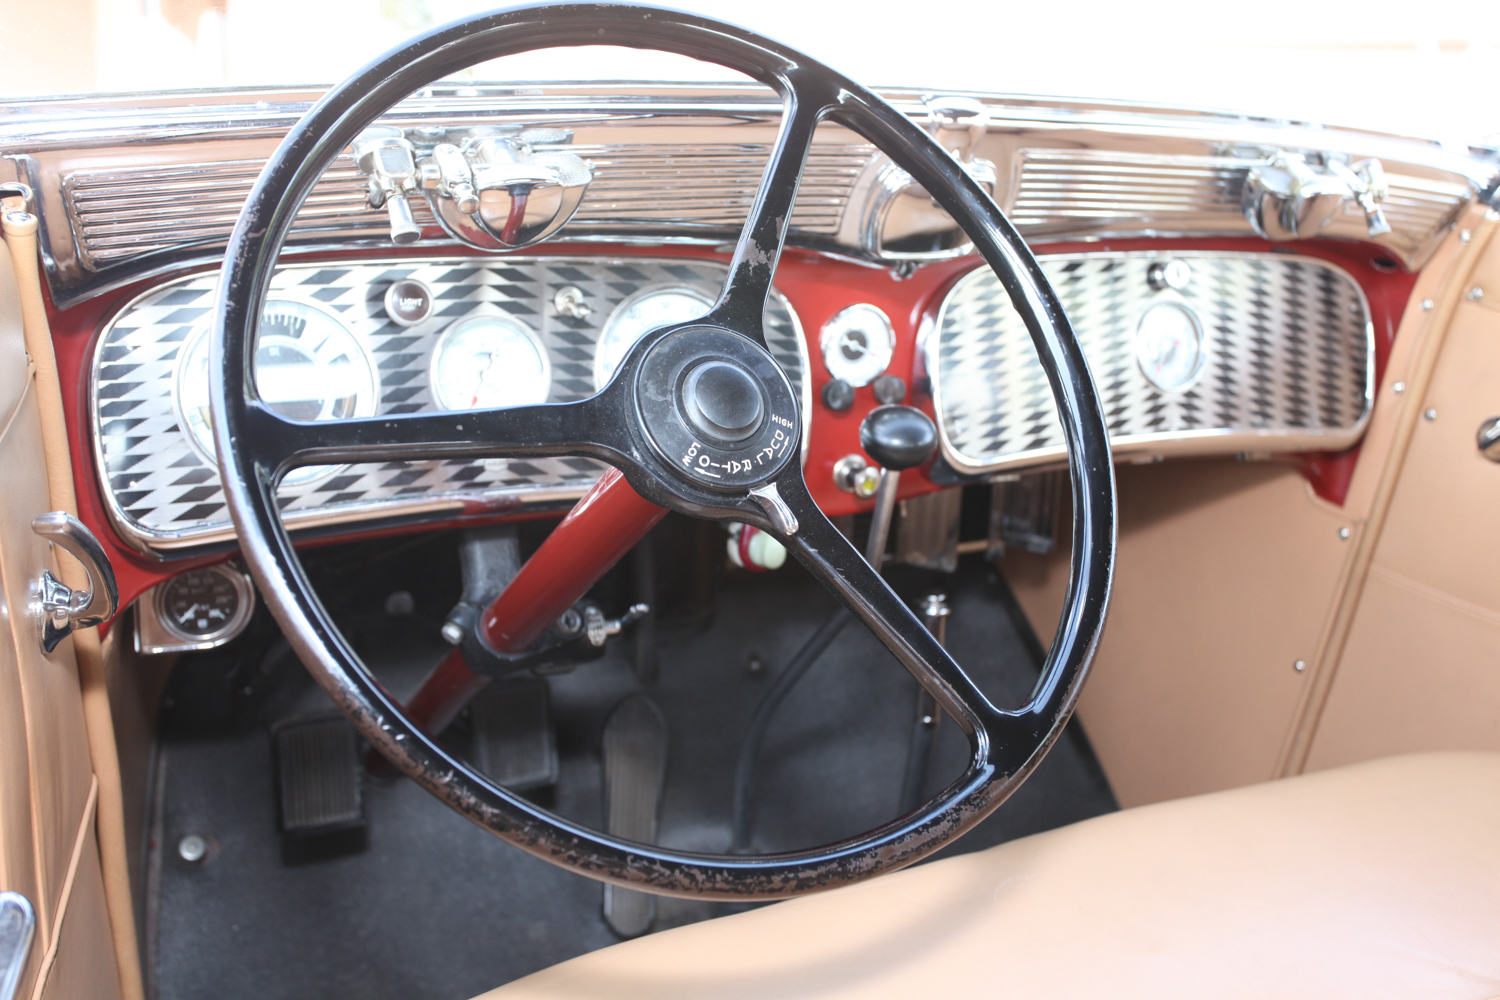 Axle ratios were selectable with the lever on the steering column.